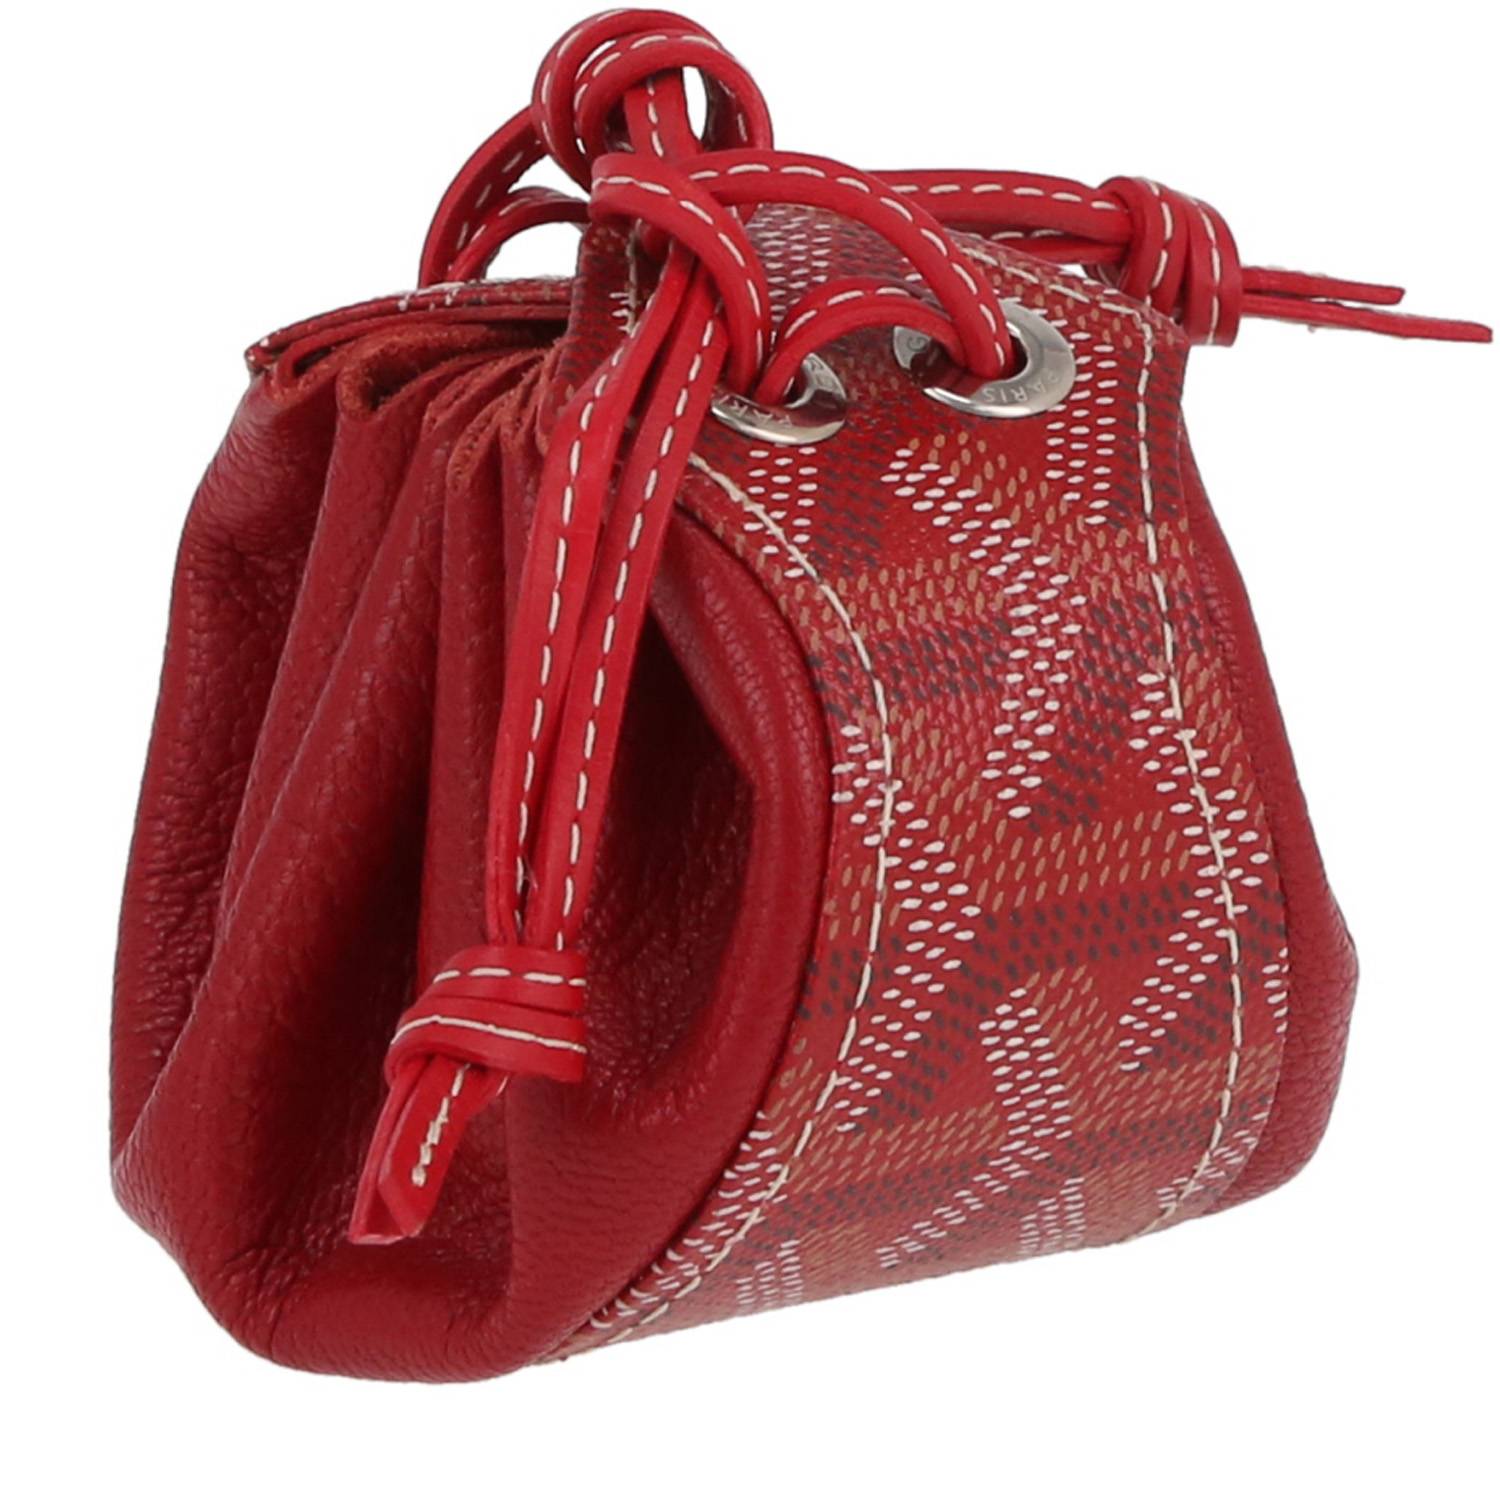 Buy Mudtale Red Color Leather Purse With Metal Golden Chain Flicker,Glitter  Design Women Sling With Adjustable Strap Handbag purse Side Sling Collage  School Office Party Sling Bag,Gift For Friend,Daughter at Amazon.in